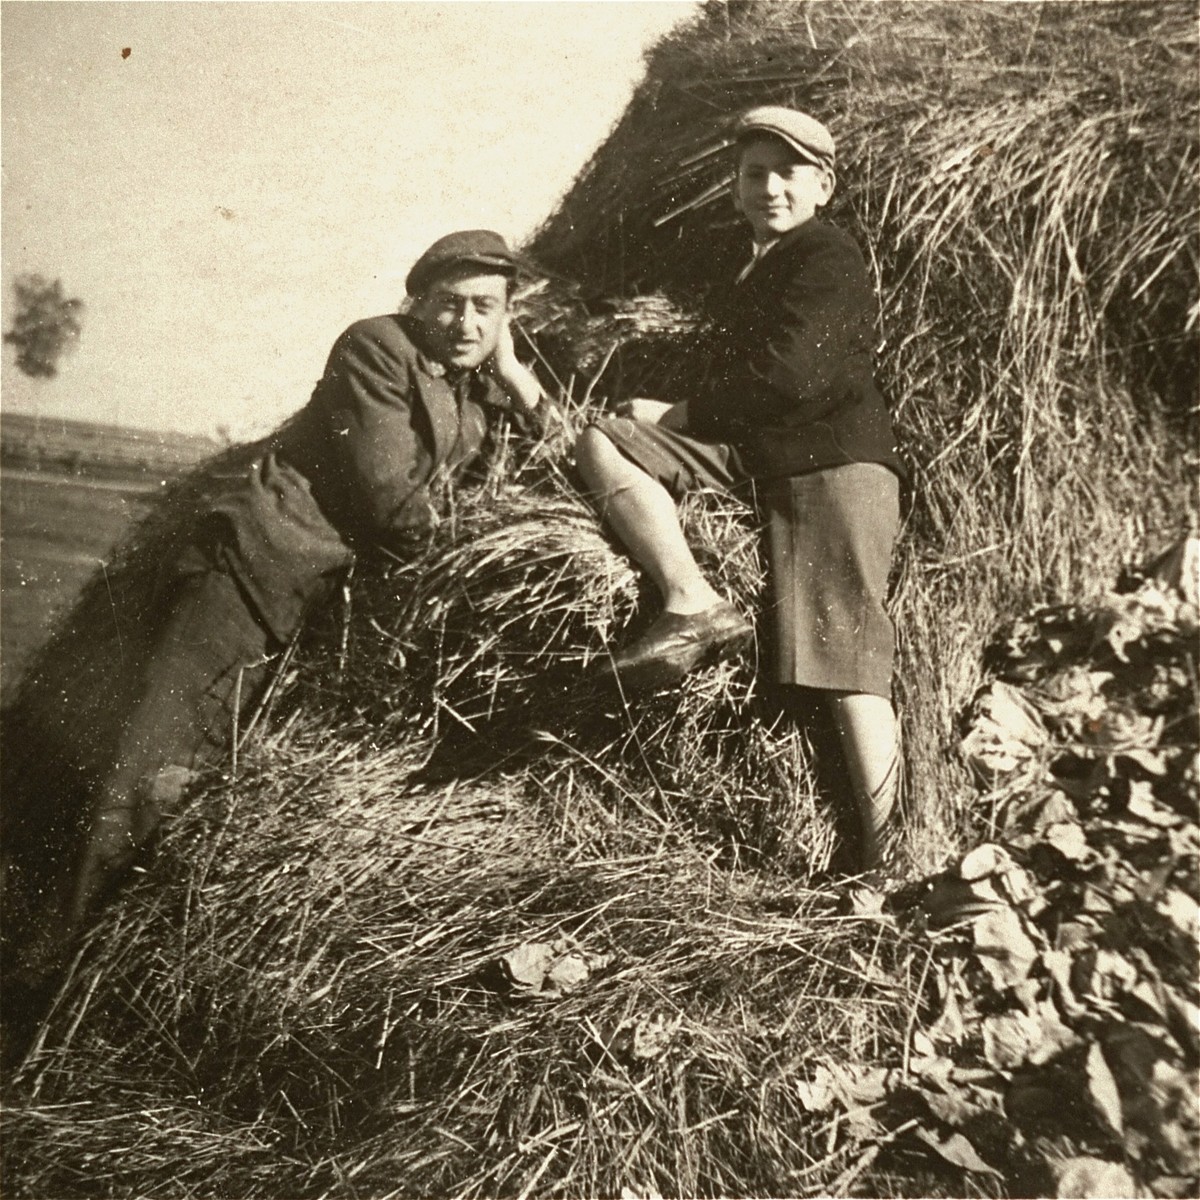 Two Jewish youth sit on a haystack in the Kolbuszowa ghetto.

Pictured are Manius Notowicz and his friend Mondi Stub.